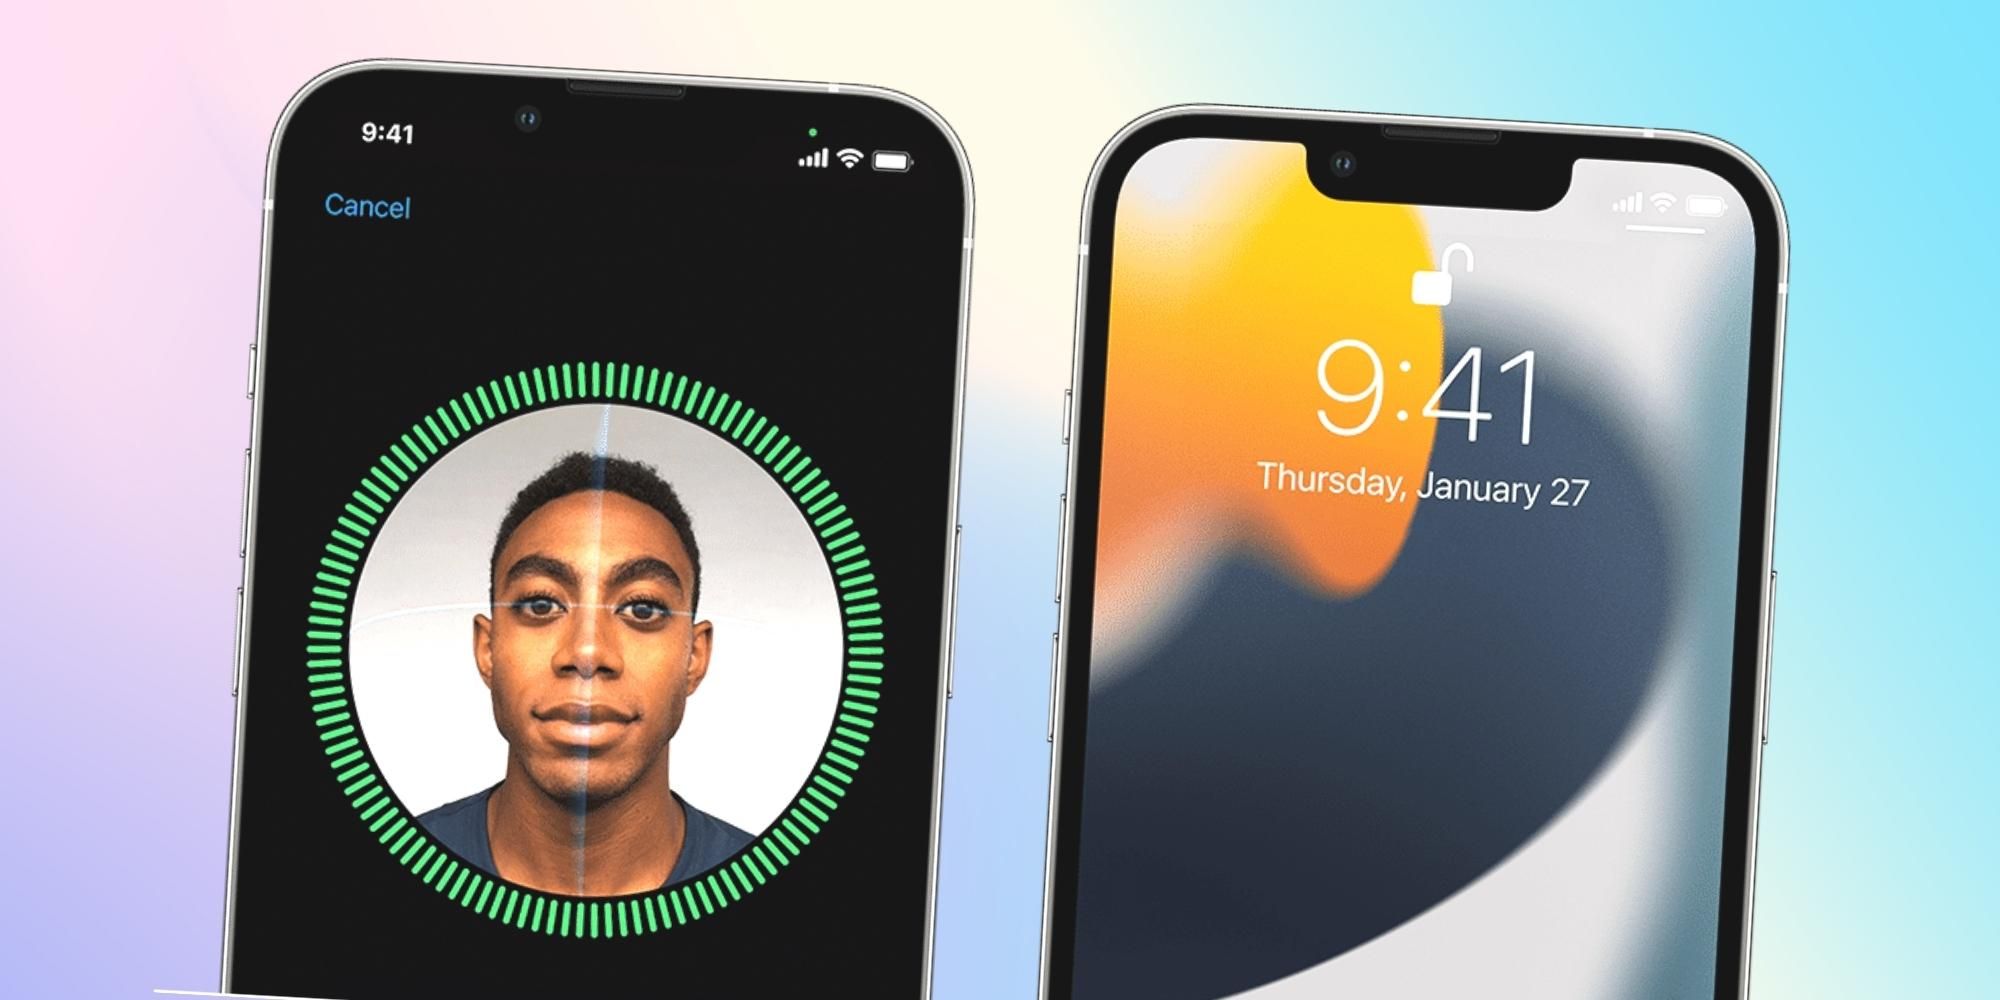 How reliable is iPhone face recognition?